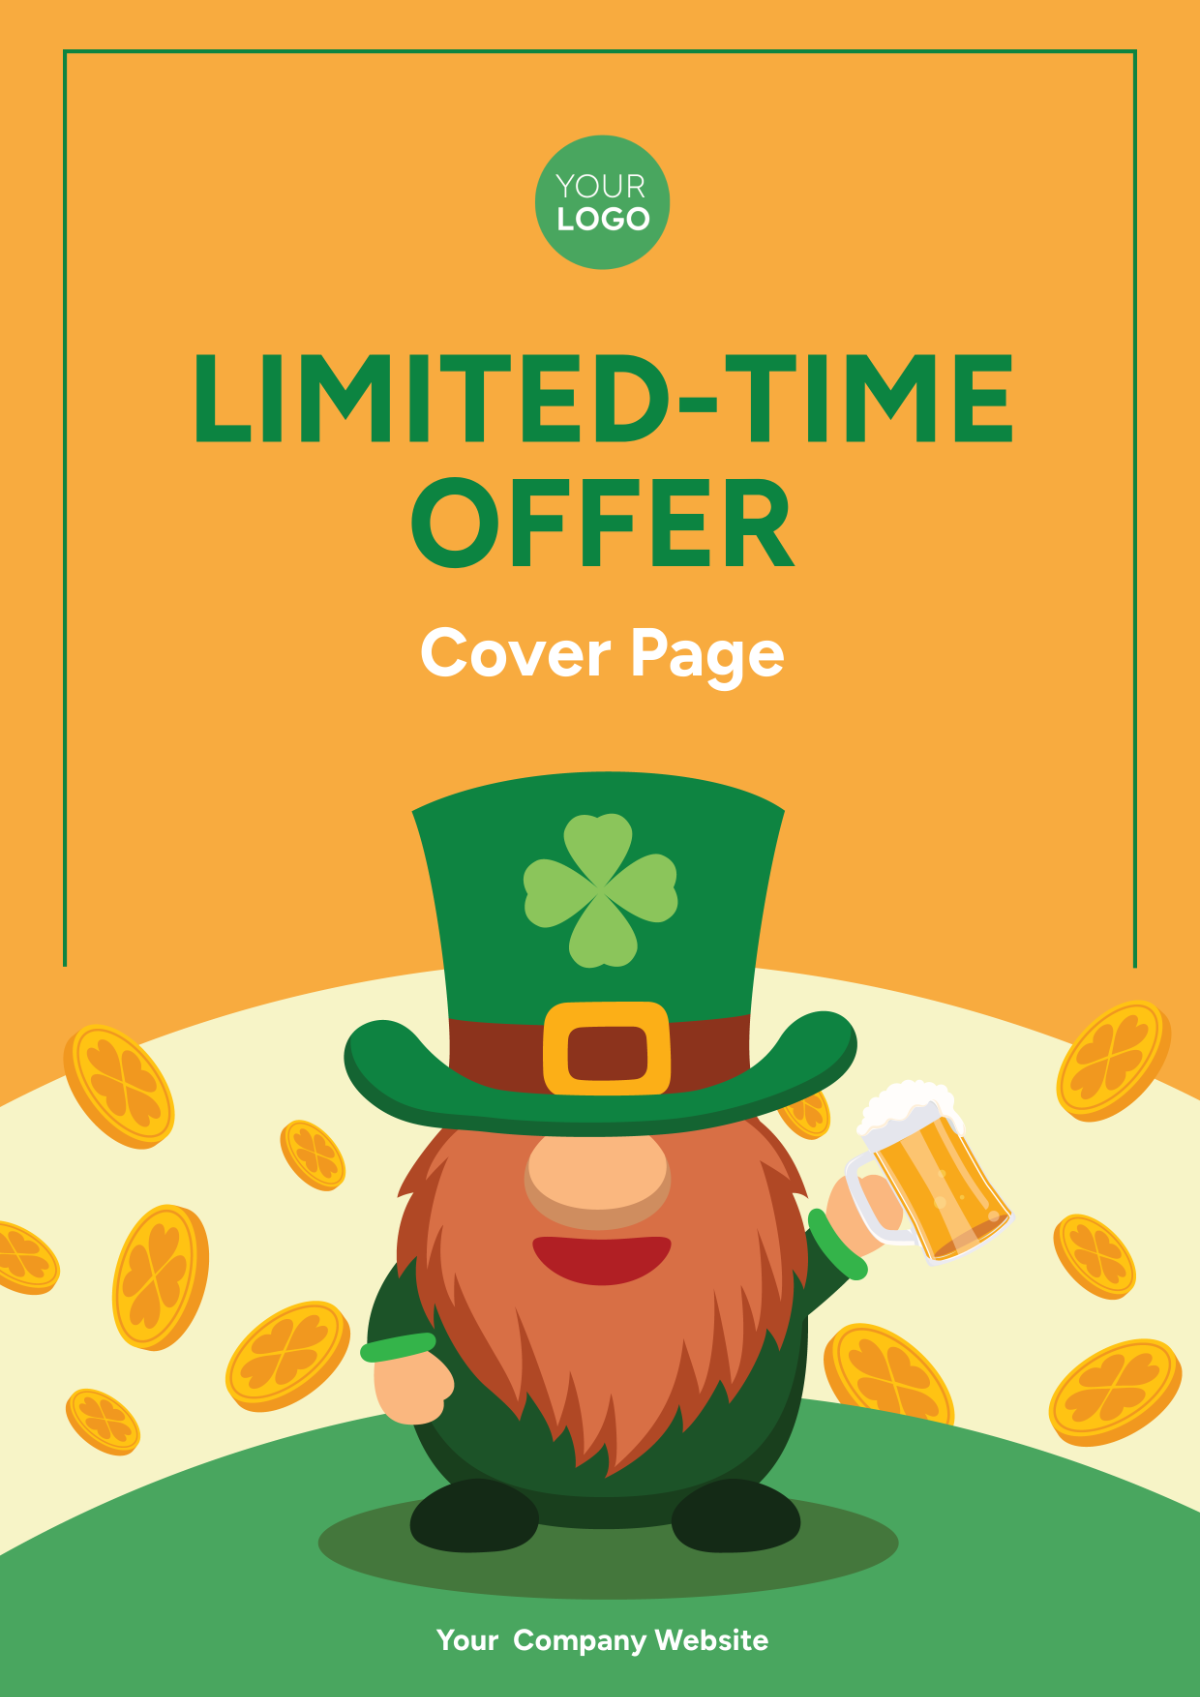 Limited-Time Offer Cover Page